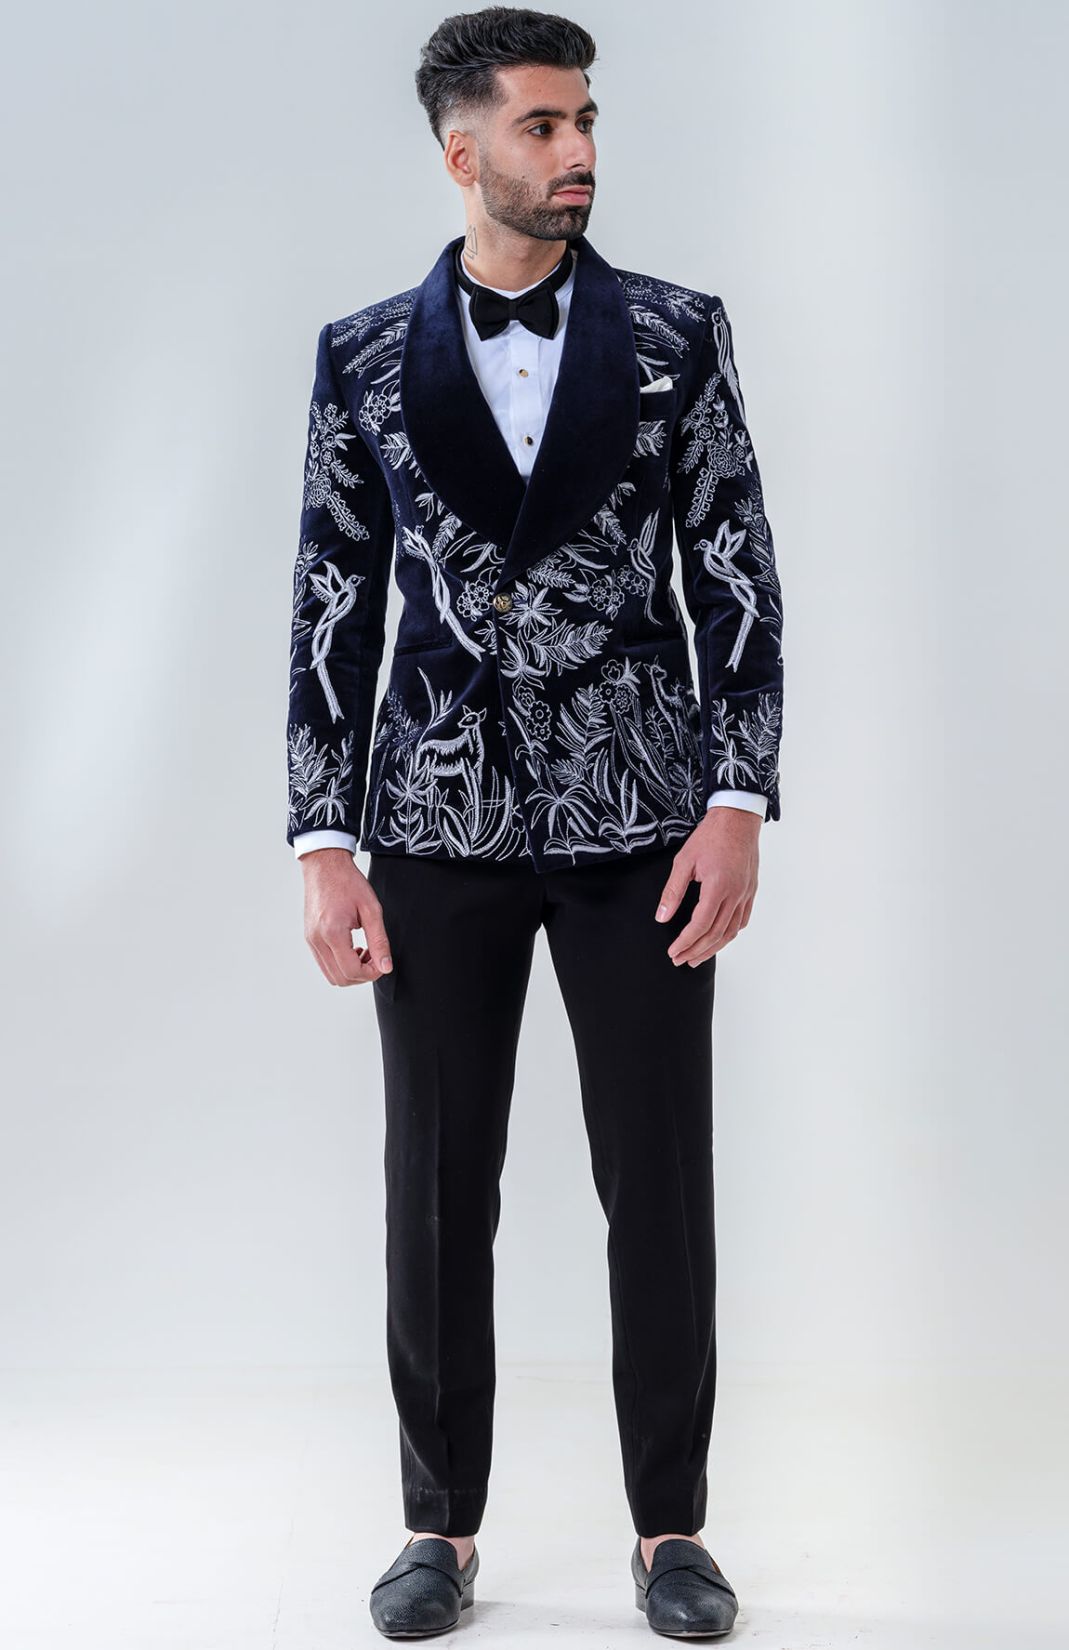 Intricately Embroidered Navy Tuxedo With Shawl Lapel